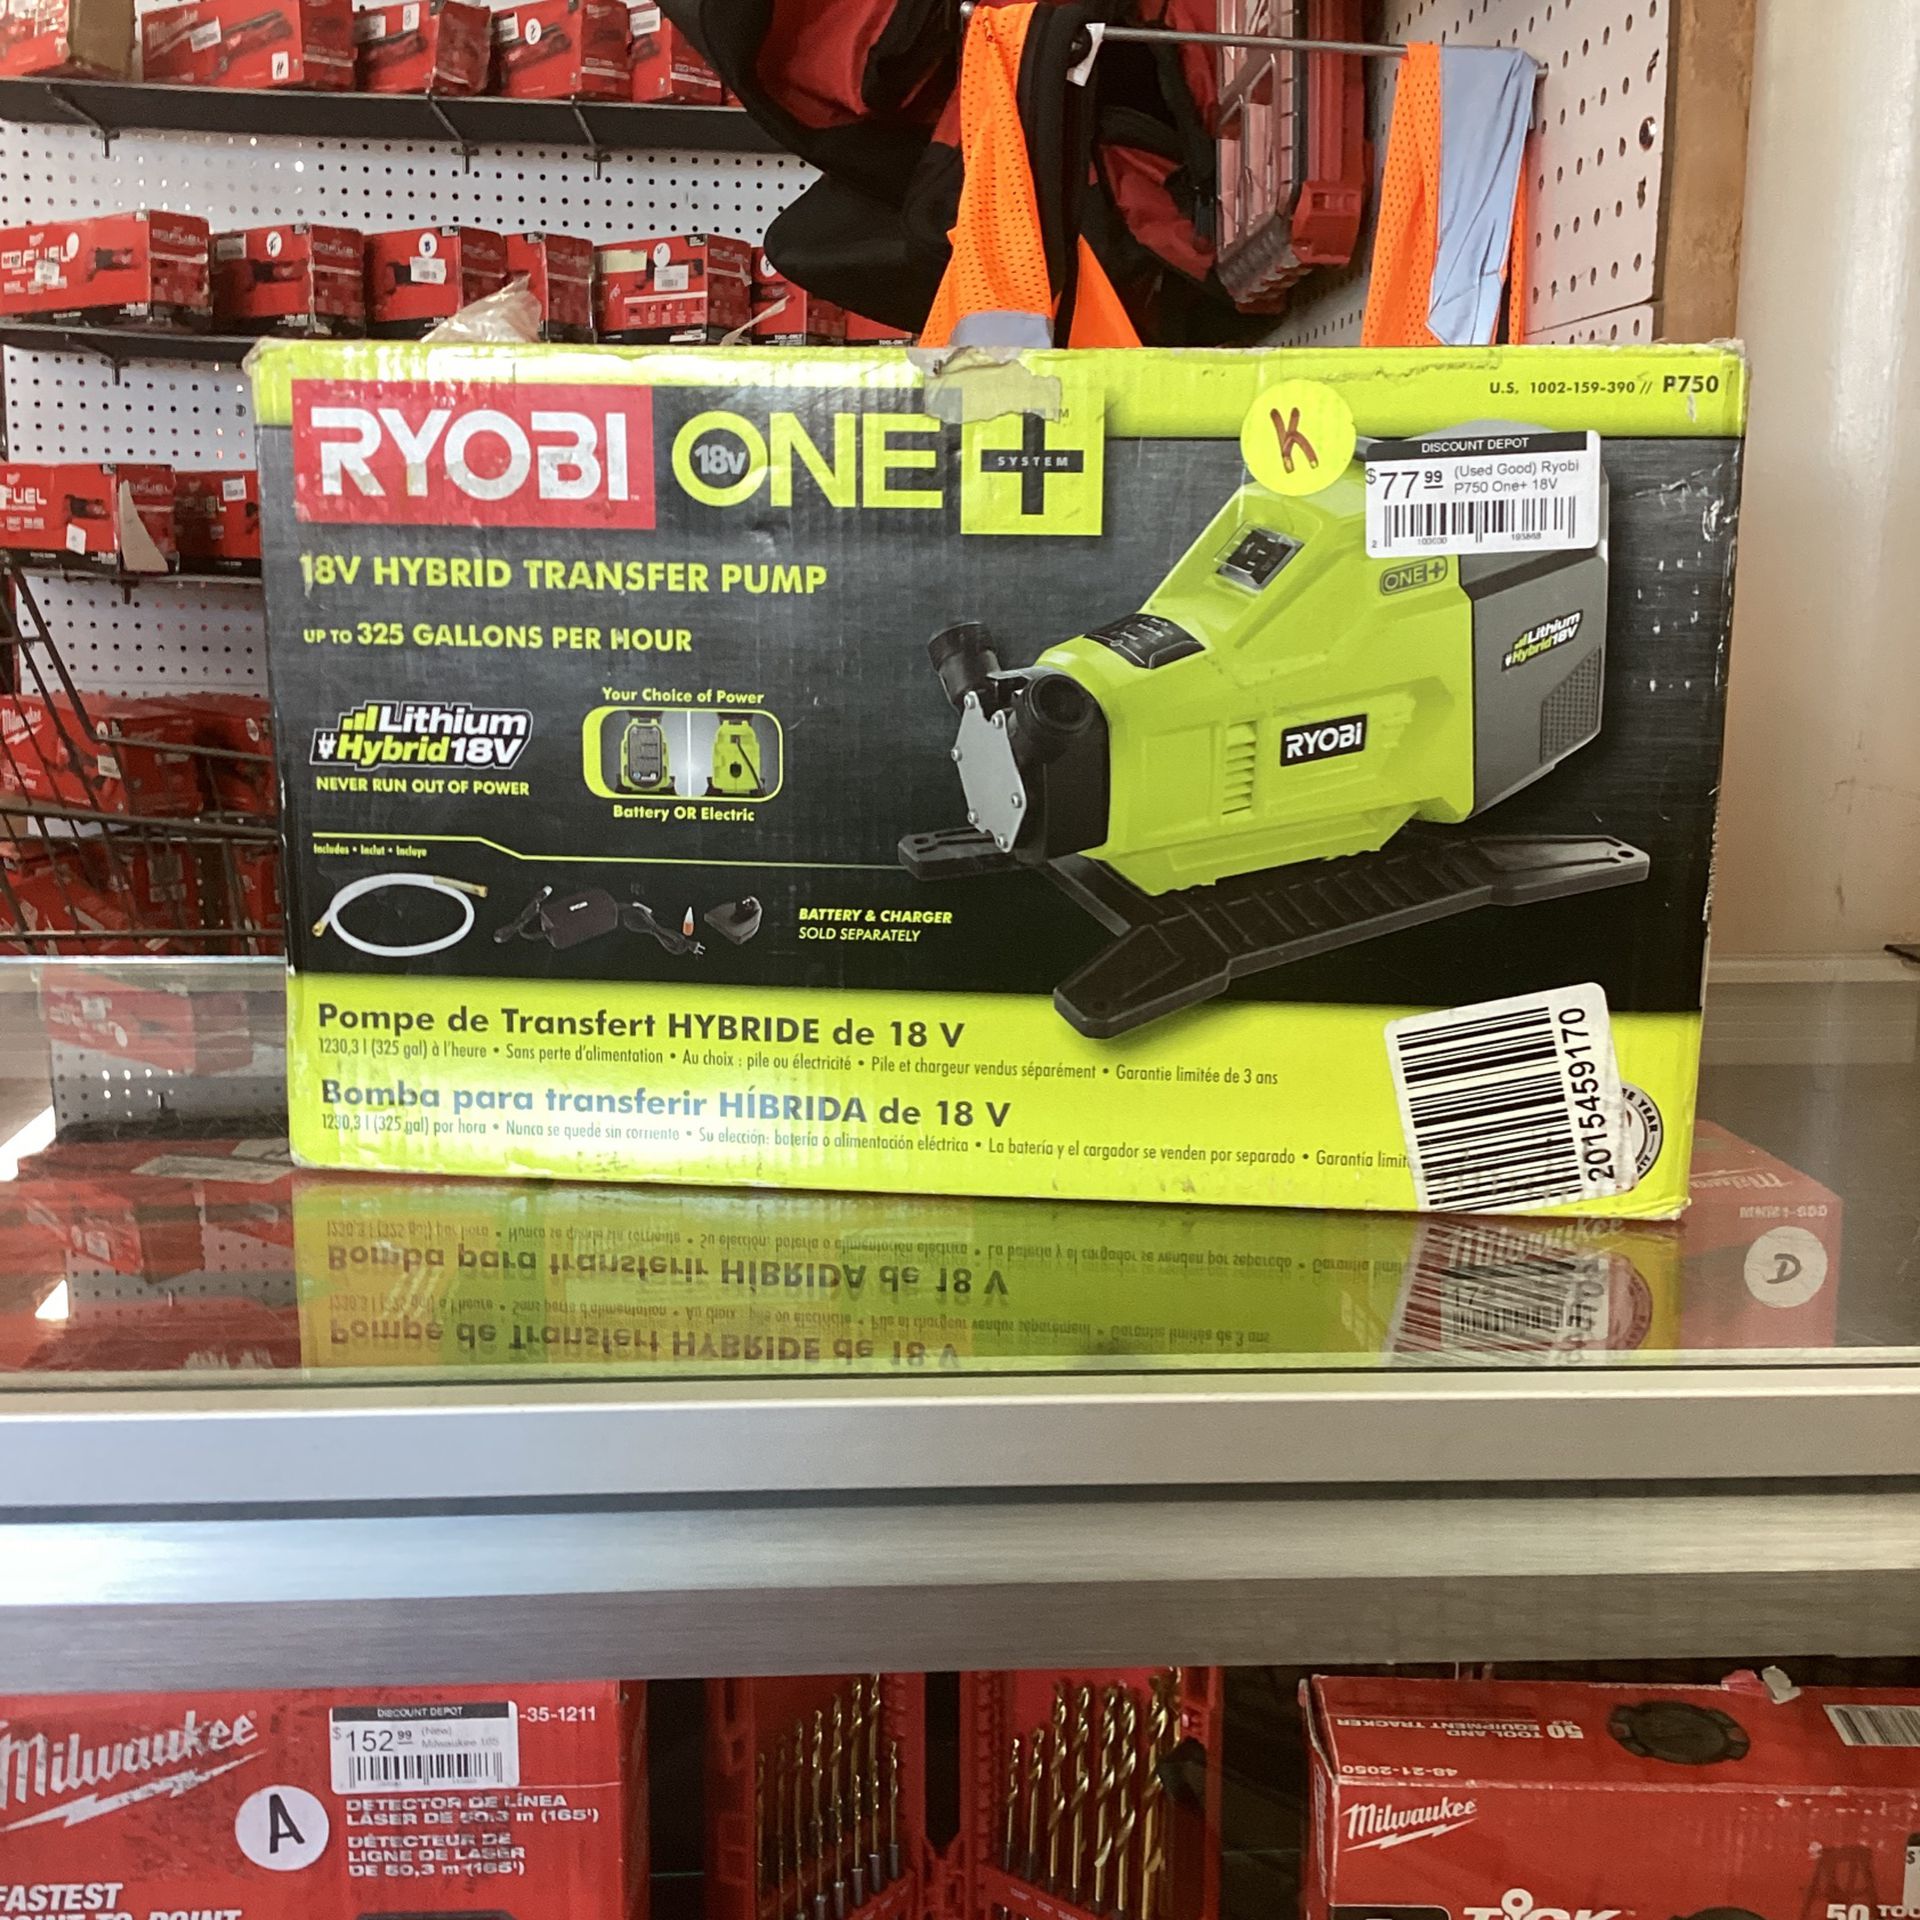  (Used Good) Ryobi P750 One+ 18V Hybrid Lithium Ion Battery or 120V AC Powered Portable Potable Water Transfer Pump (Battery Not Included, Tool Only)